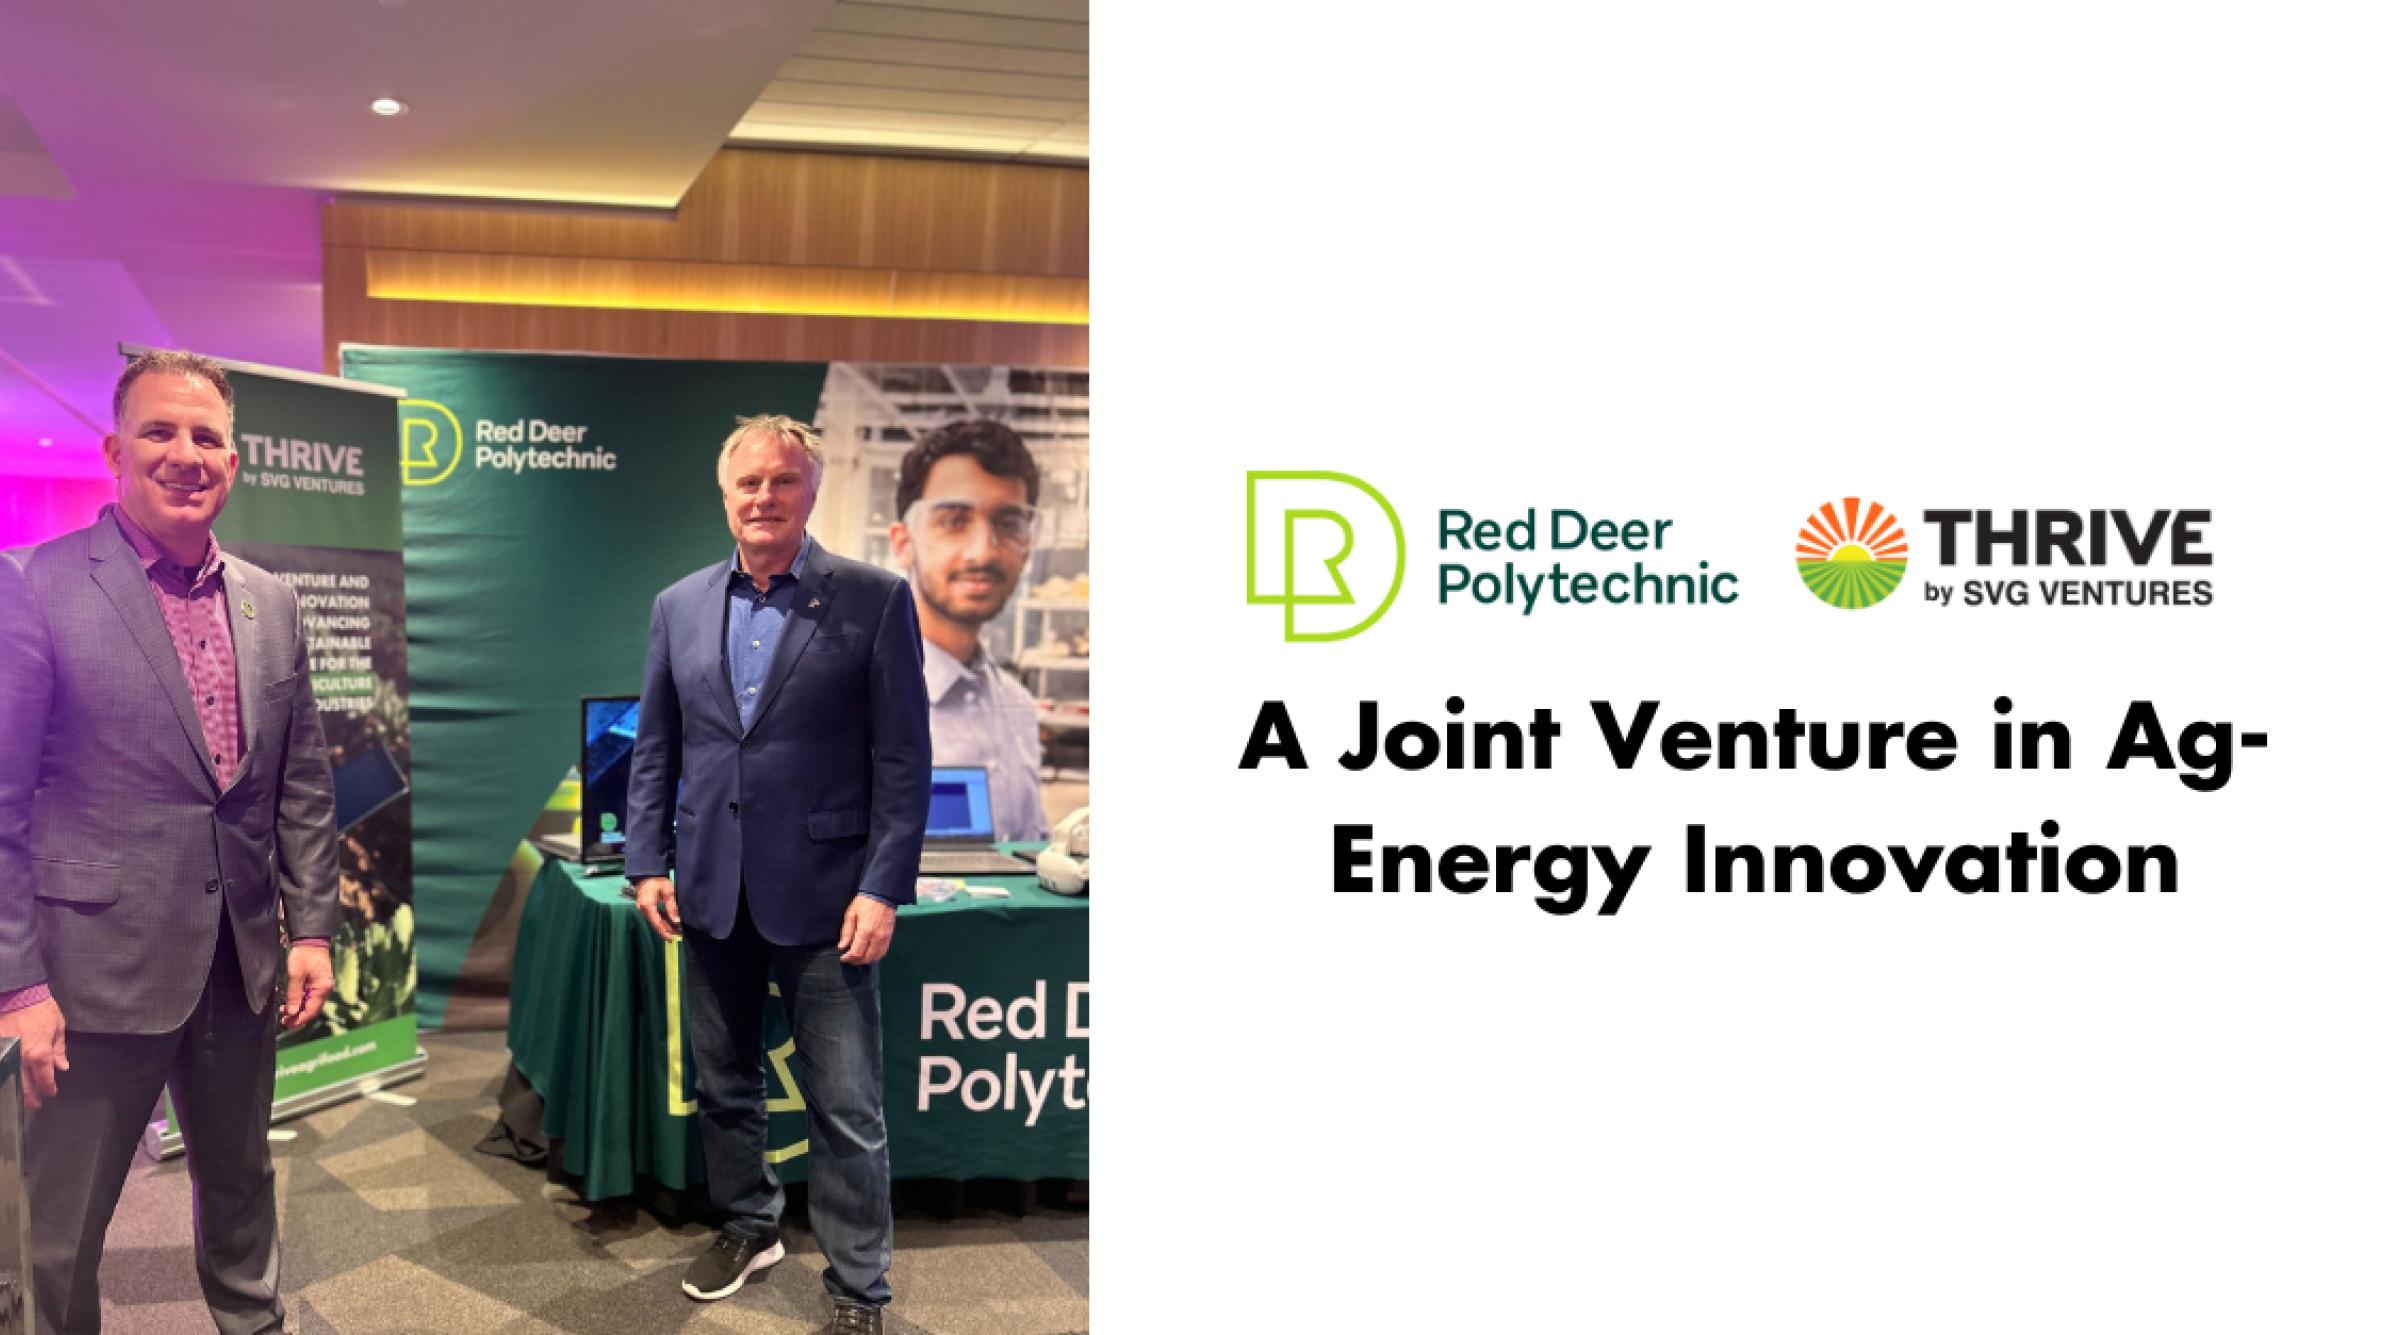 RDP & SVG Ventures|THRIVE have signed an MOU to support economic growth and sustainability across Alberta